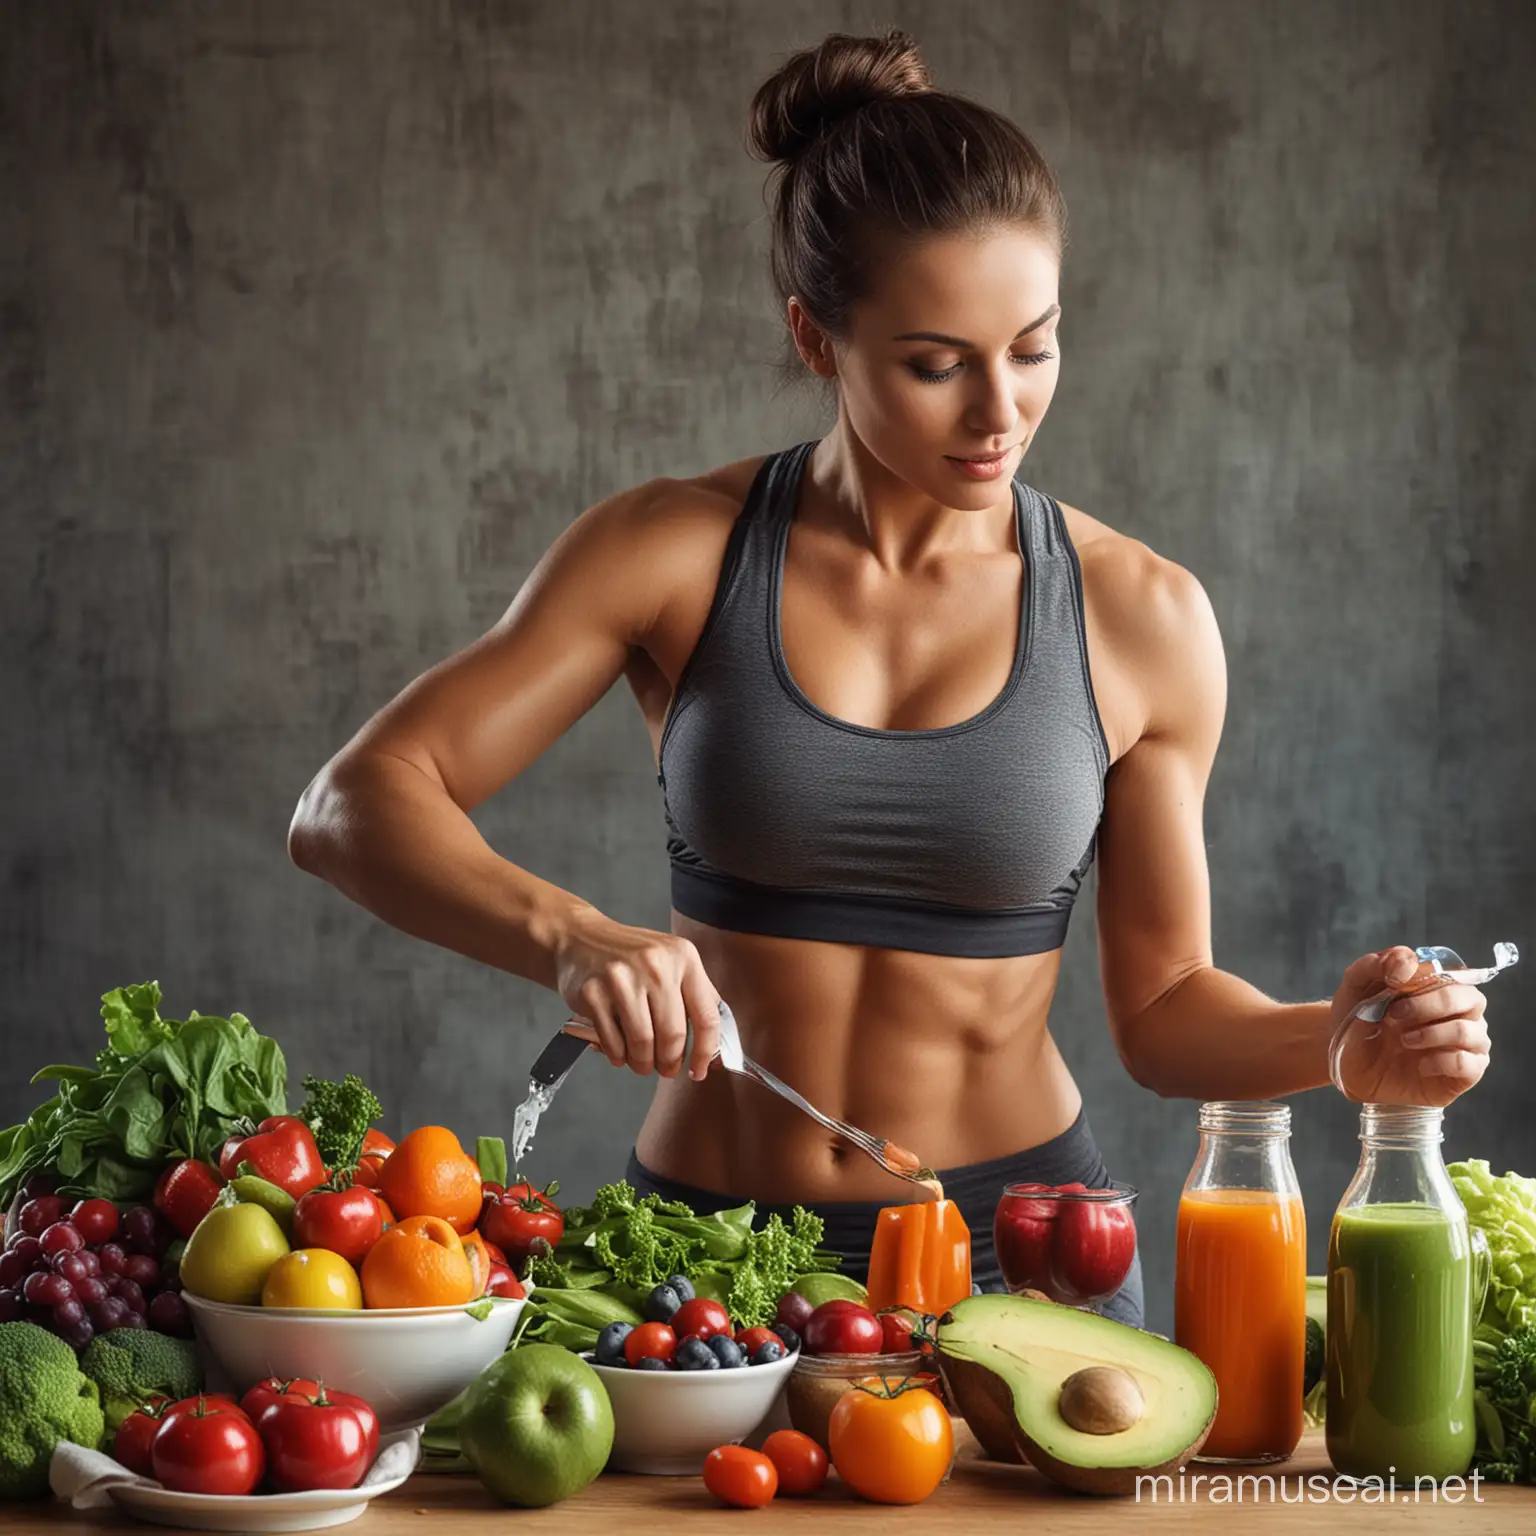 Healthy Lifestyle Nutrition and Fitness Concept with Fresh Fruits and Exercise Equipment